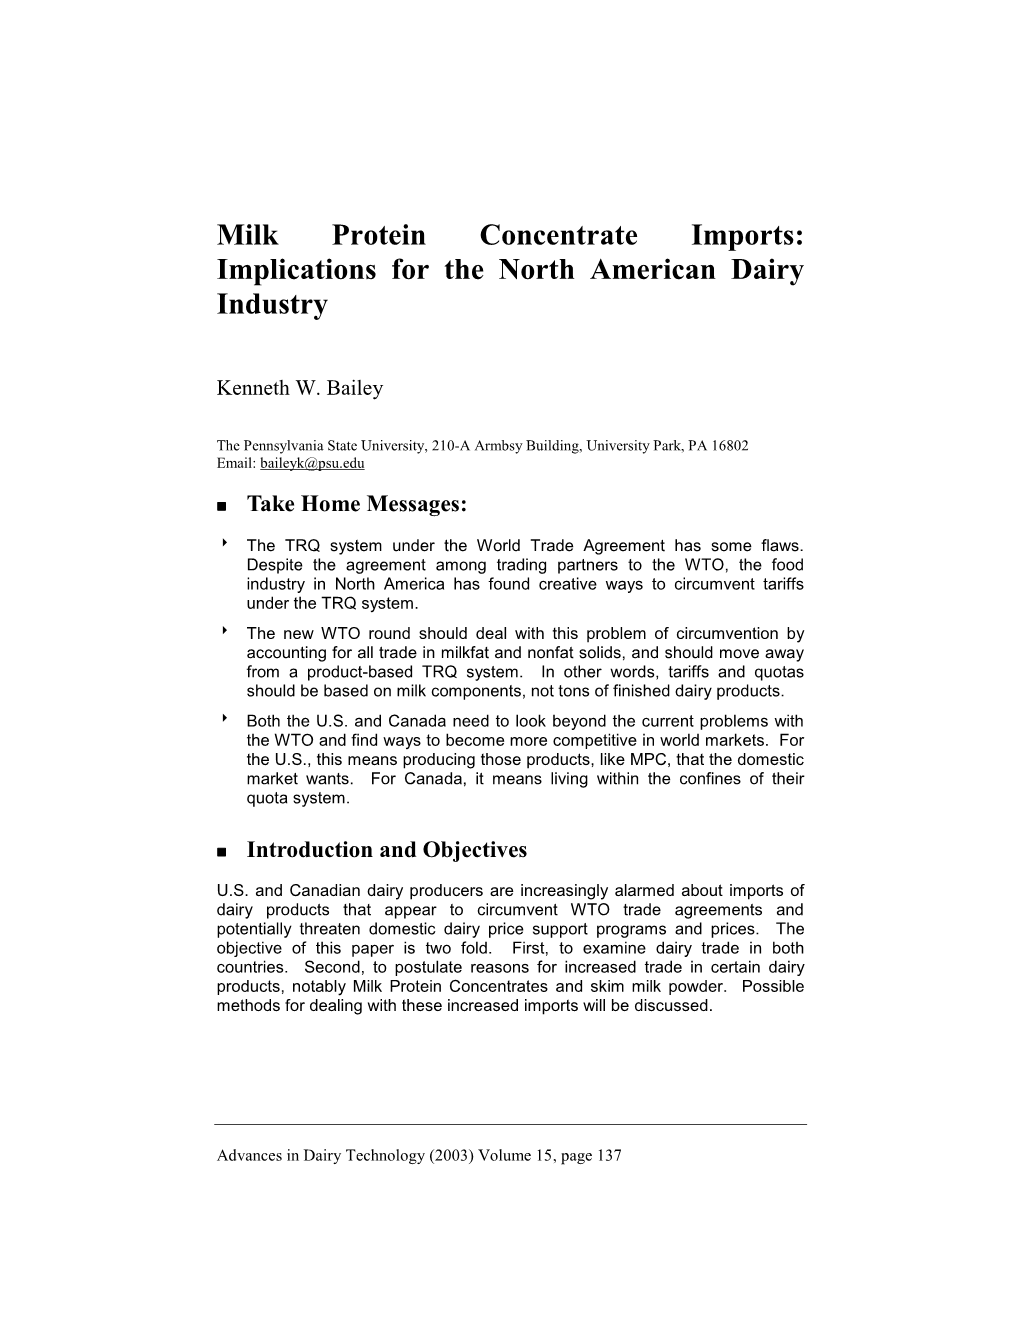 Milk Protein Concentrate Imports: Implications for the North American Dairy Industry